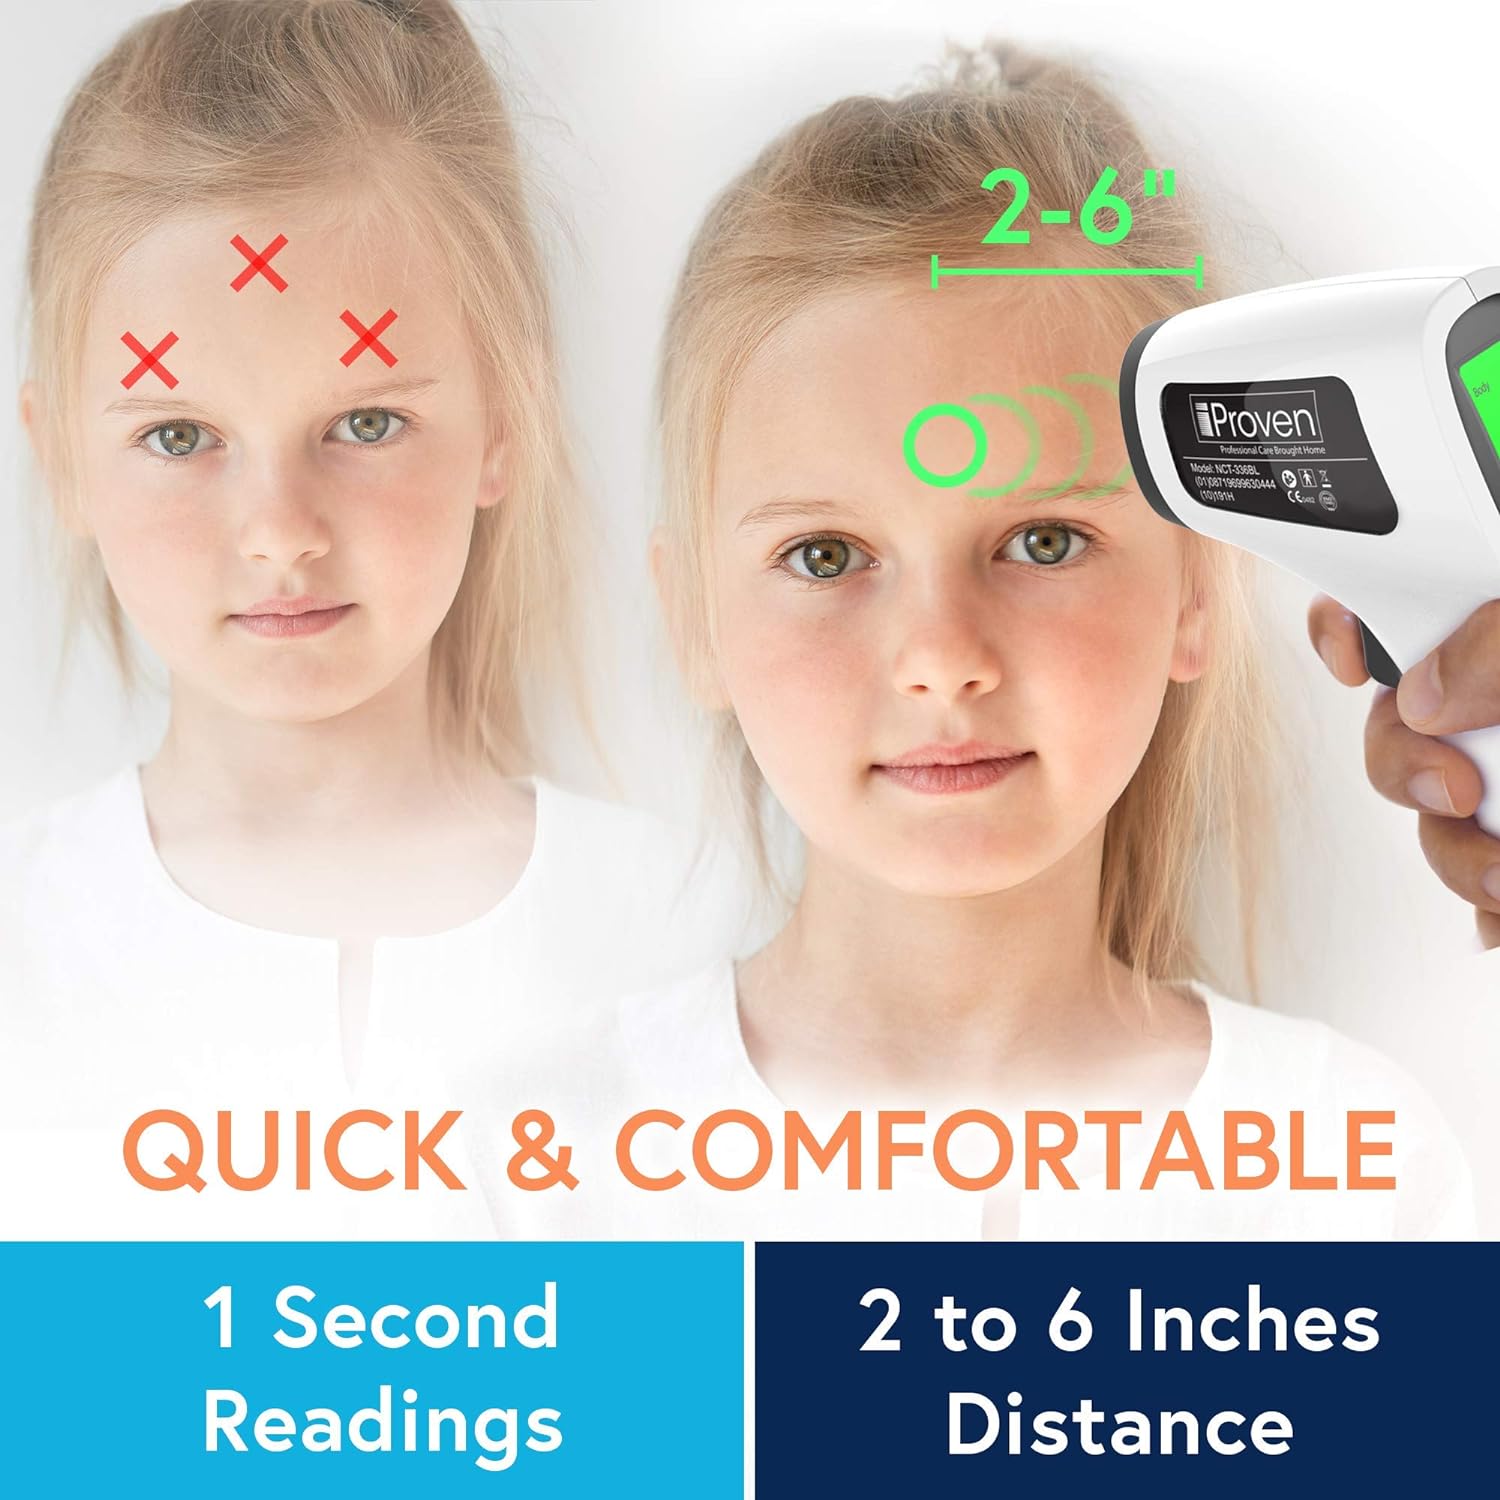 No Touch Infrared Thermometer, Health Care Temporal Forehead Temp Gun, Digital Medical iProven Non Contact Thermometer, Ideal for Adults and Kids, Measures Fever in Safe Distance (2-6 Inch) : Baby